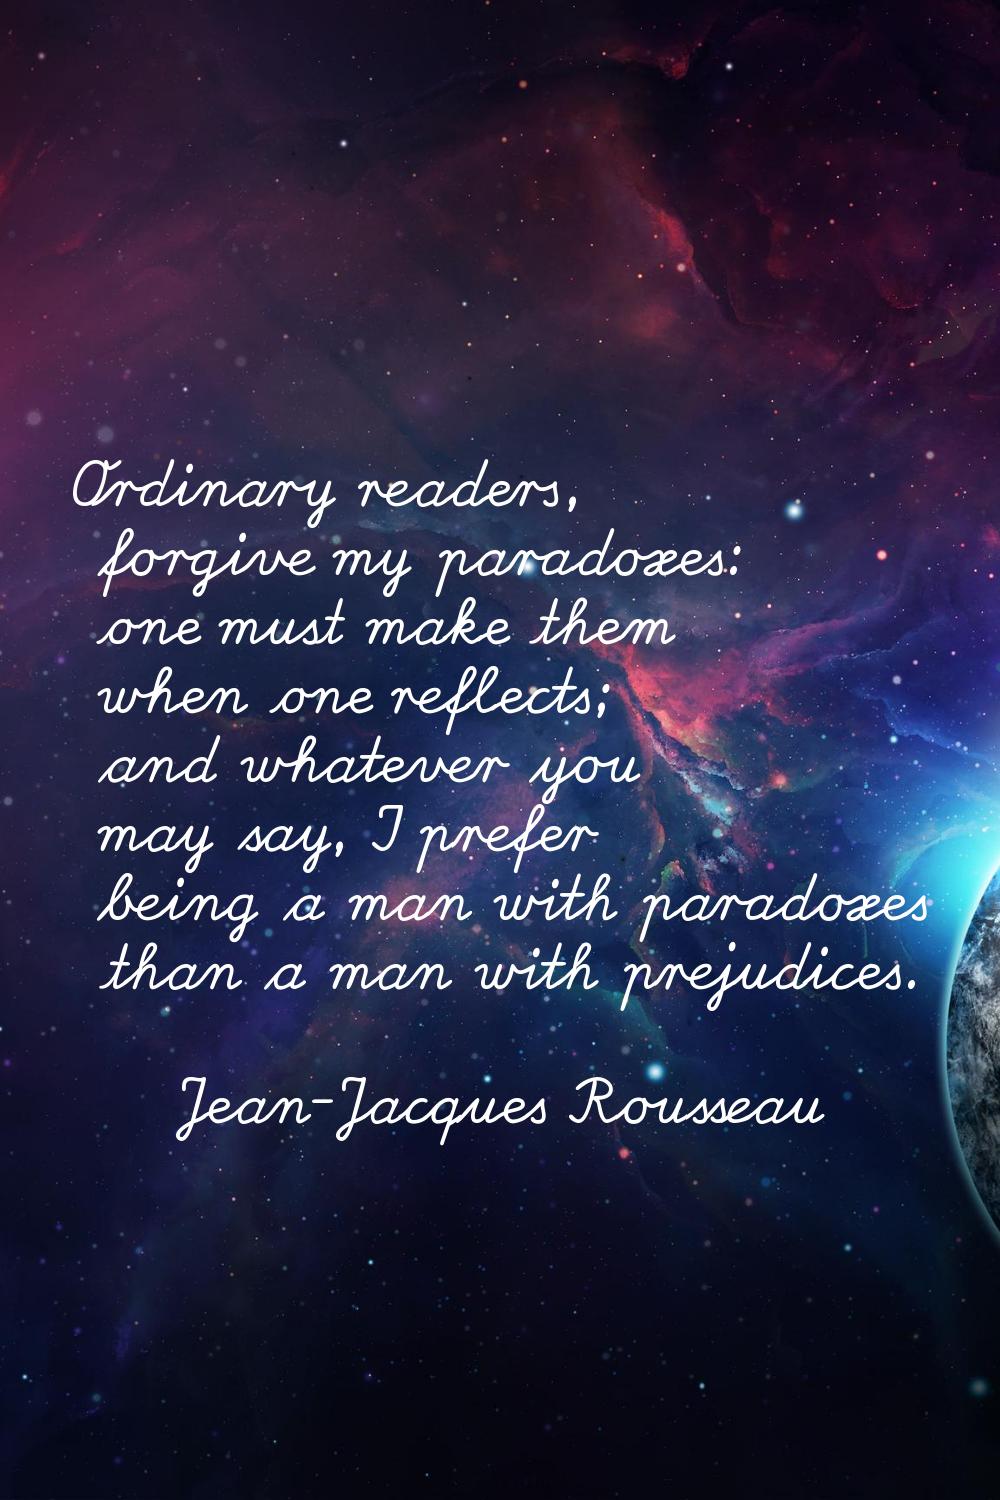 Ordinary readers, forgive my paradoxes: one must make them when one reflects; and whatever you may 